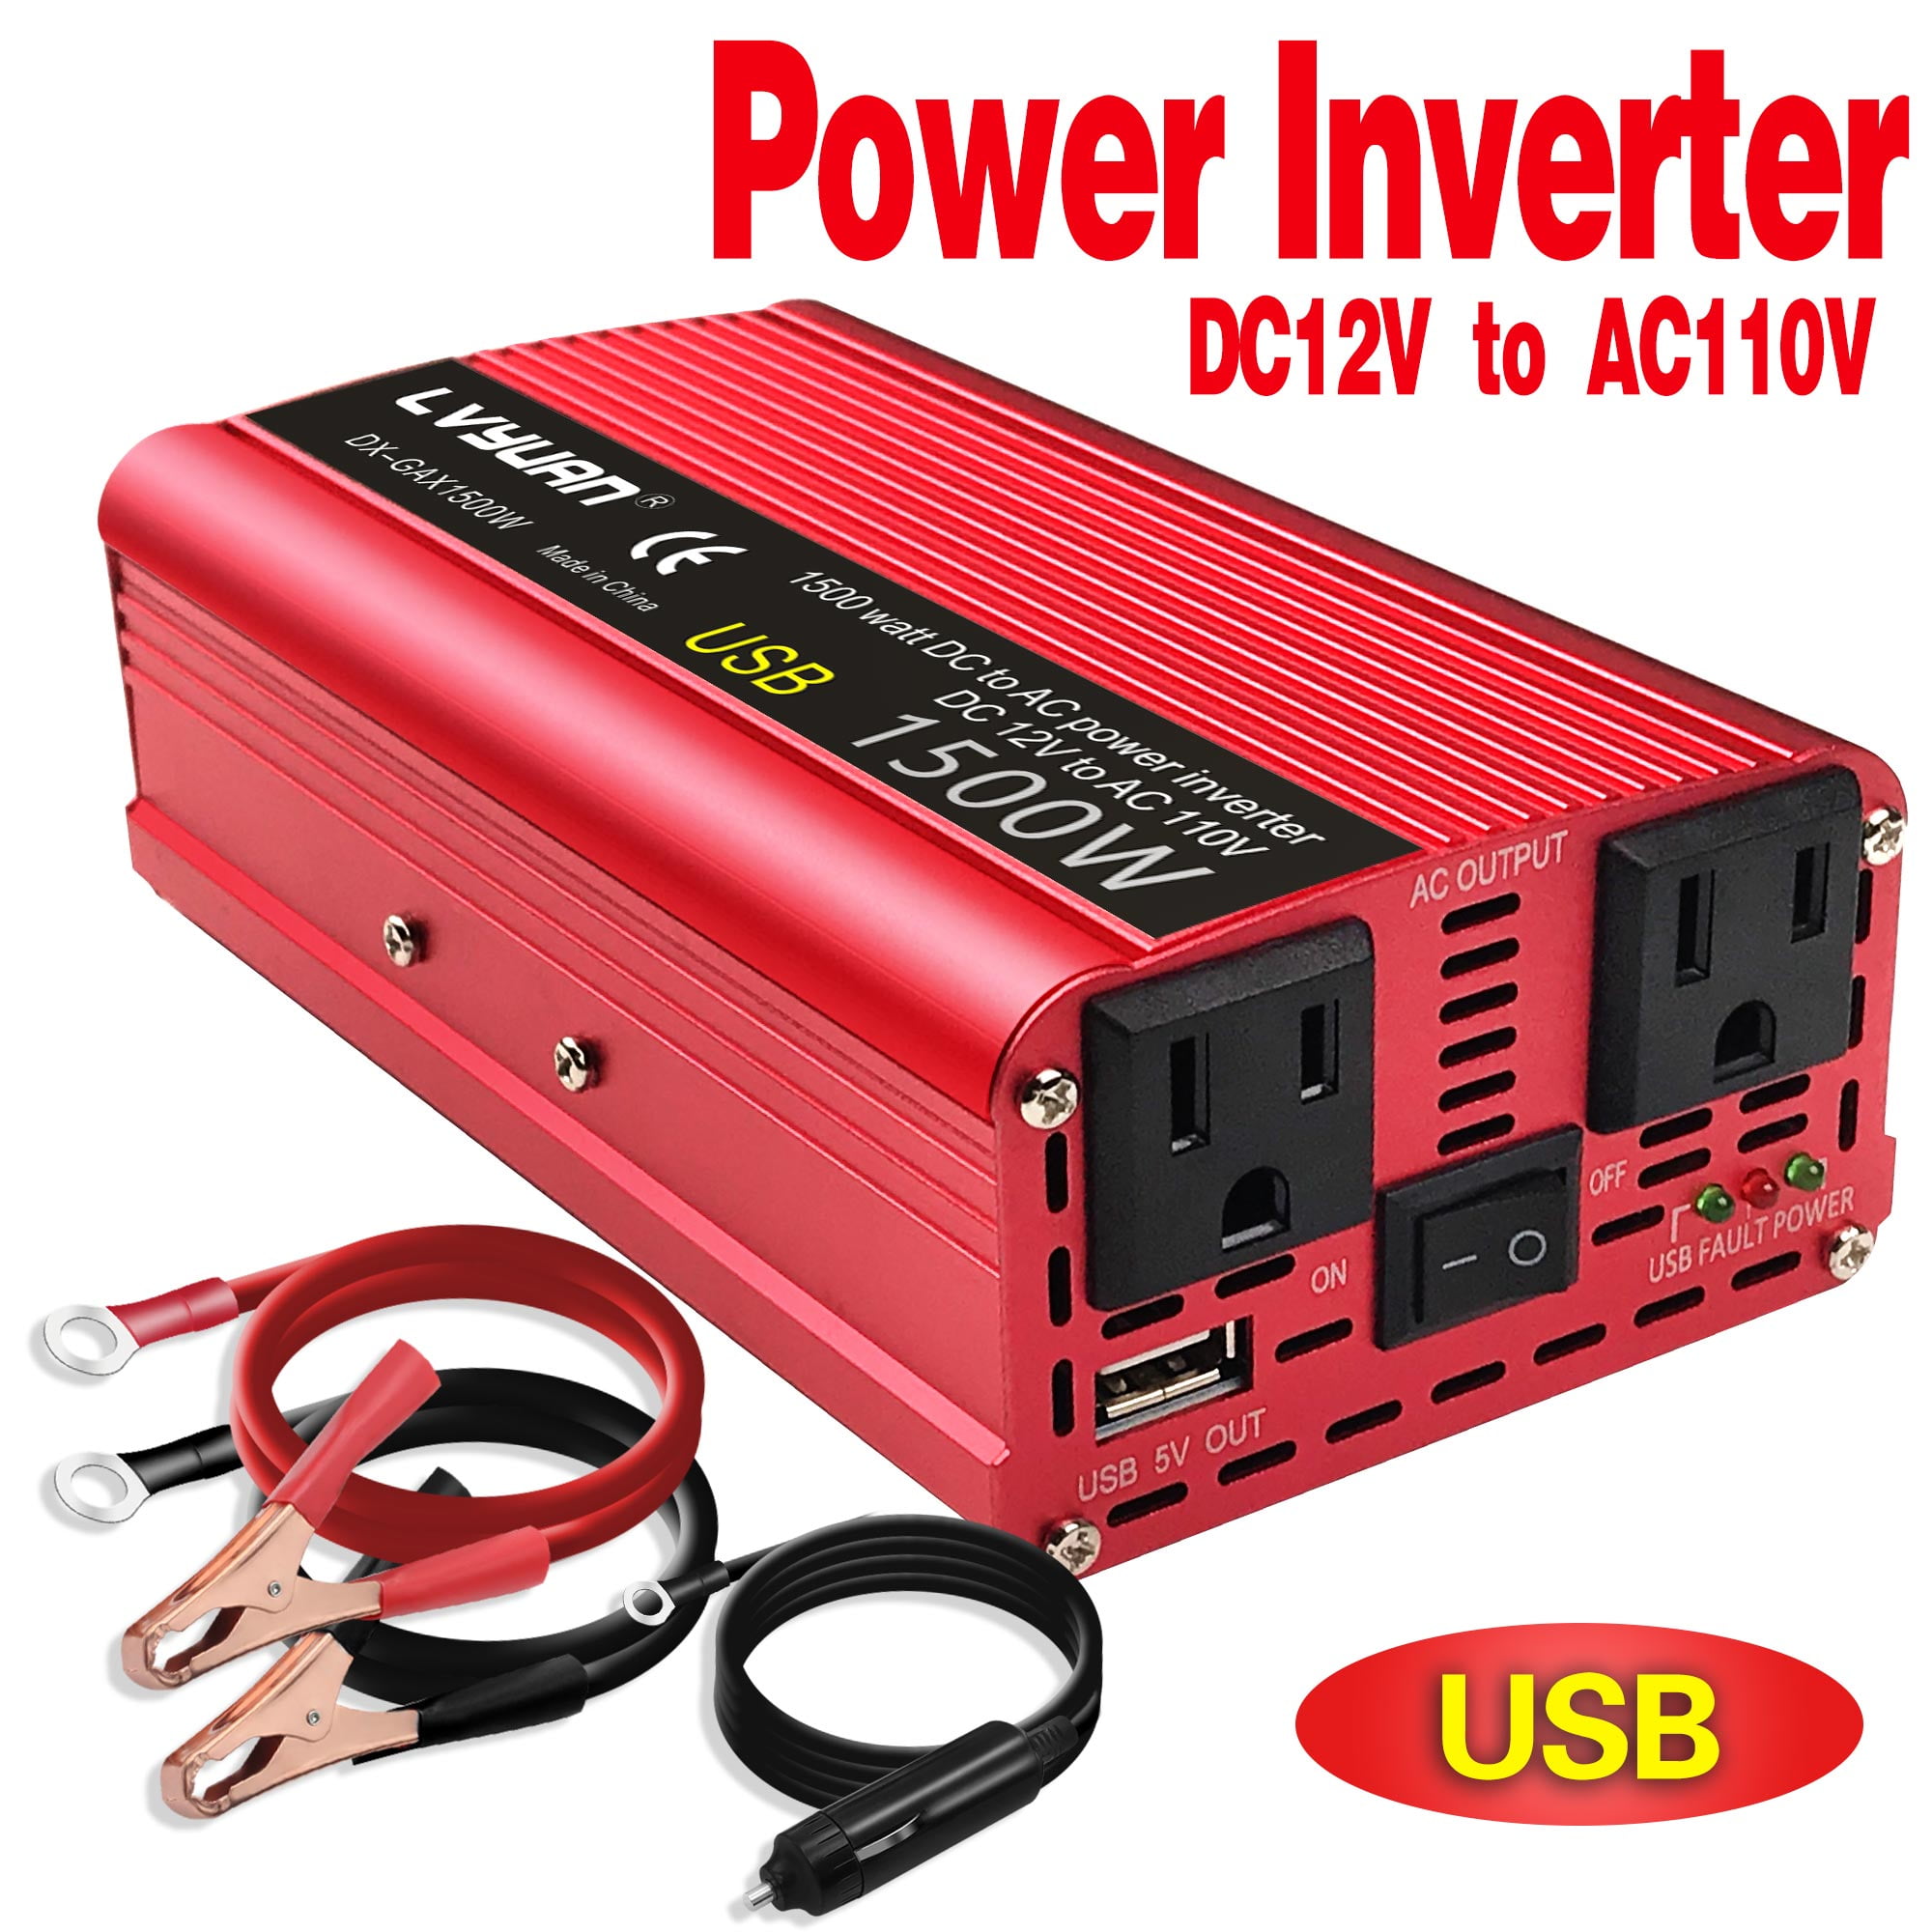 500W 300W 500W 1000W 1500WPower Inverter Converter DC 12V to AC 110V Car Charger with 2.1A 2 USB Ports Car Power Adapter-Red